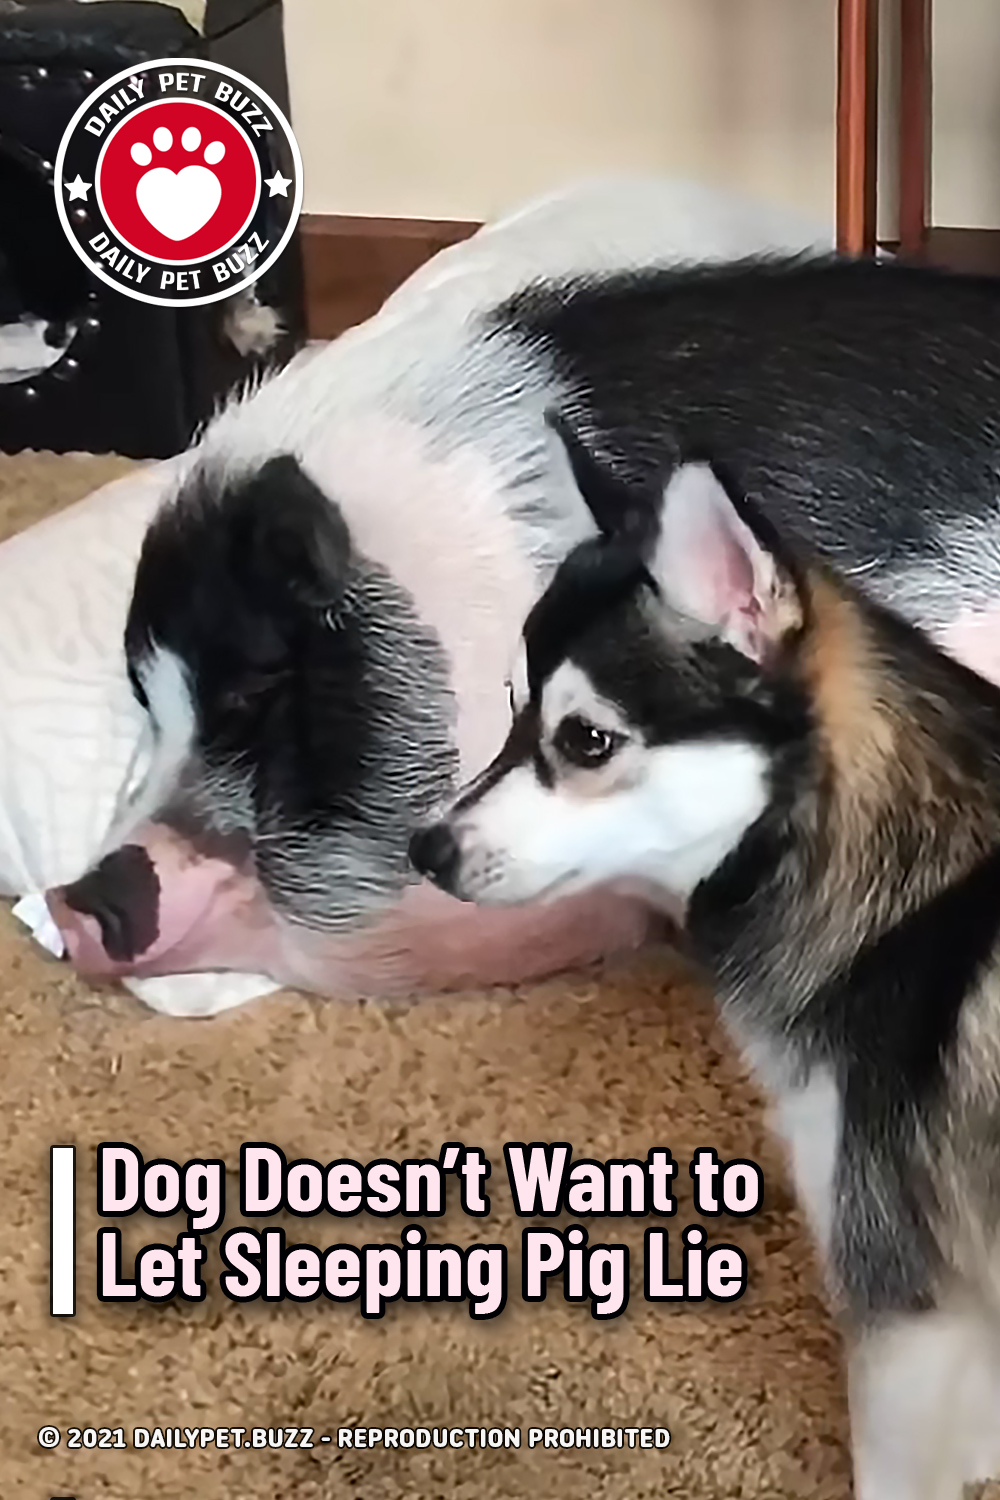 Dog Doesn’t Want to Let Sleeping Pig Lie